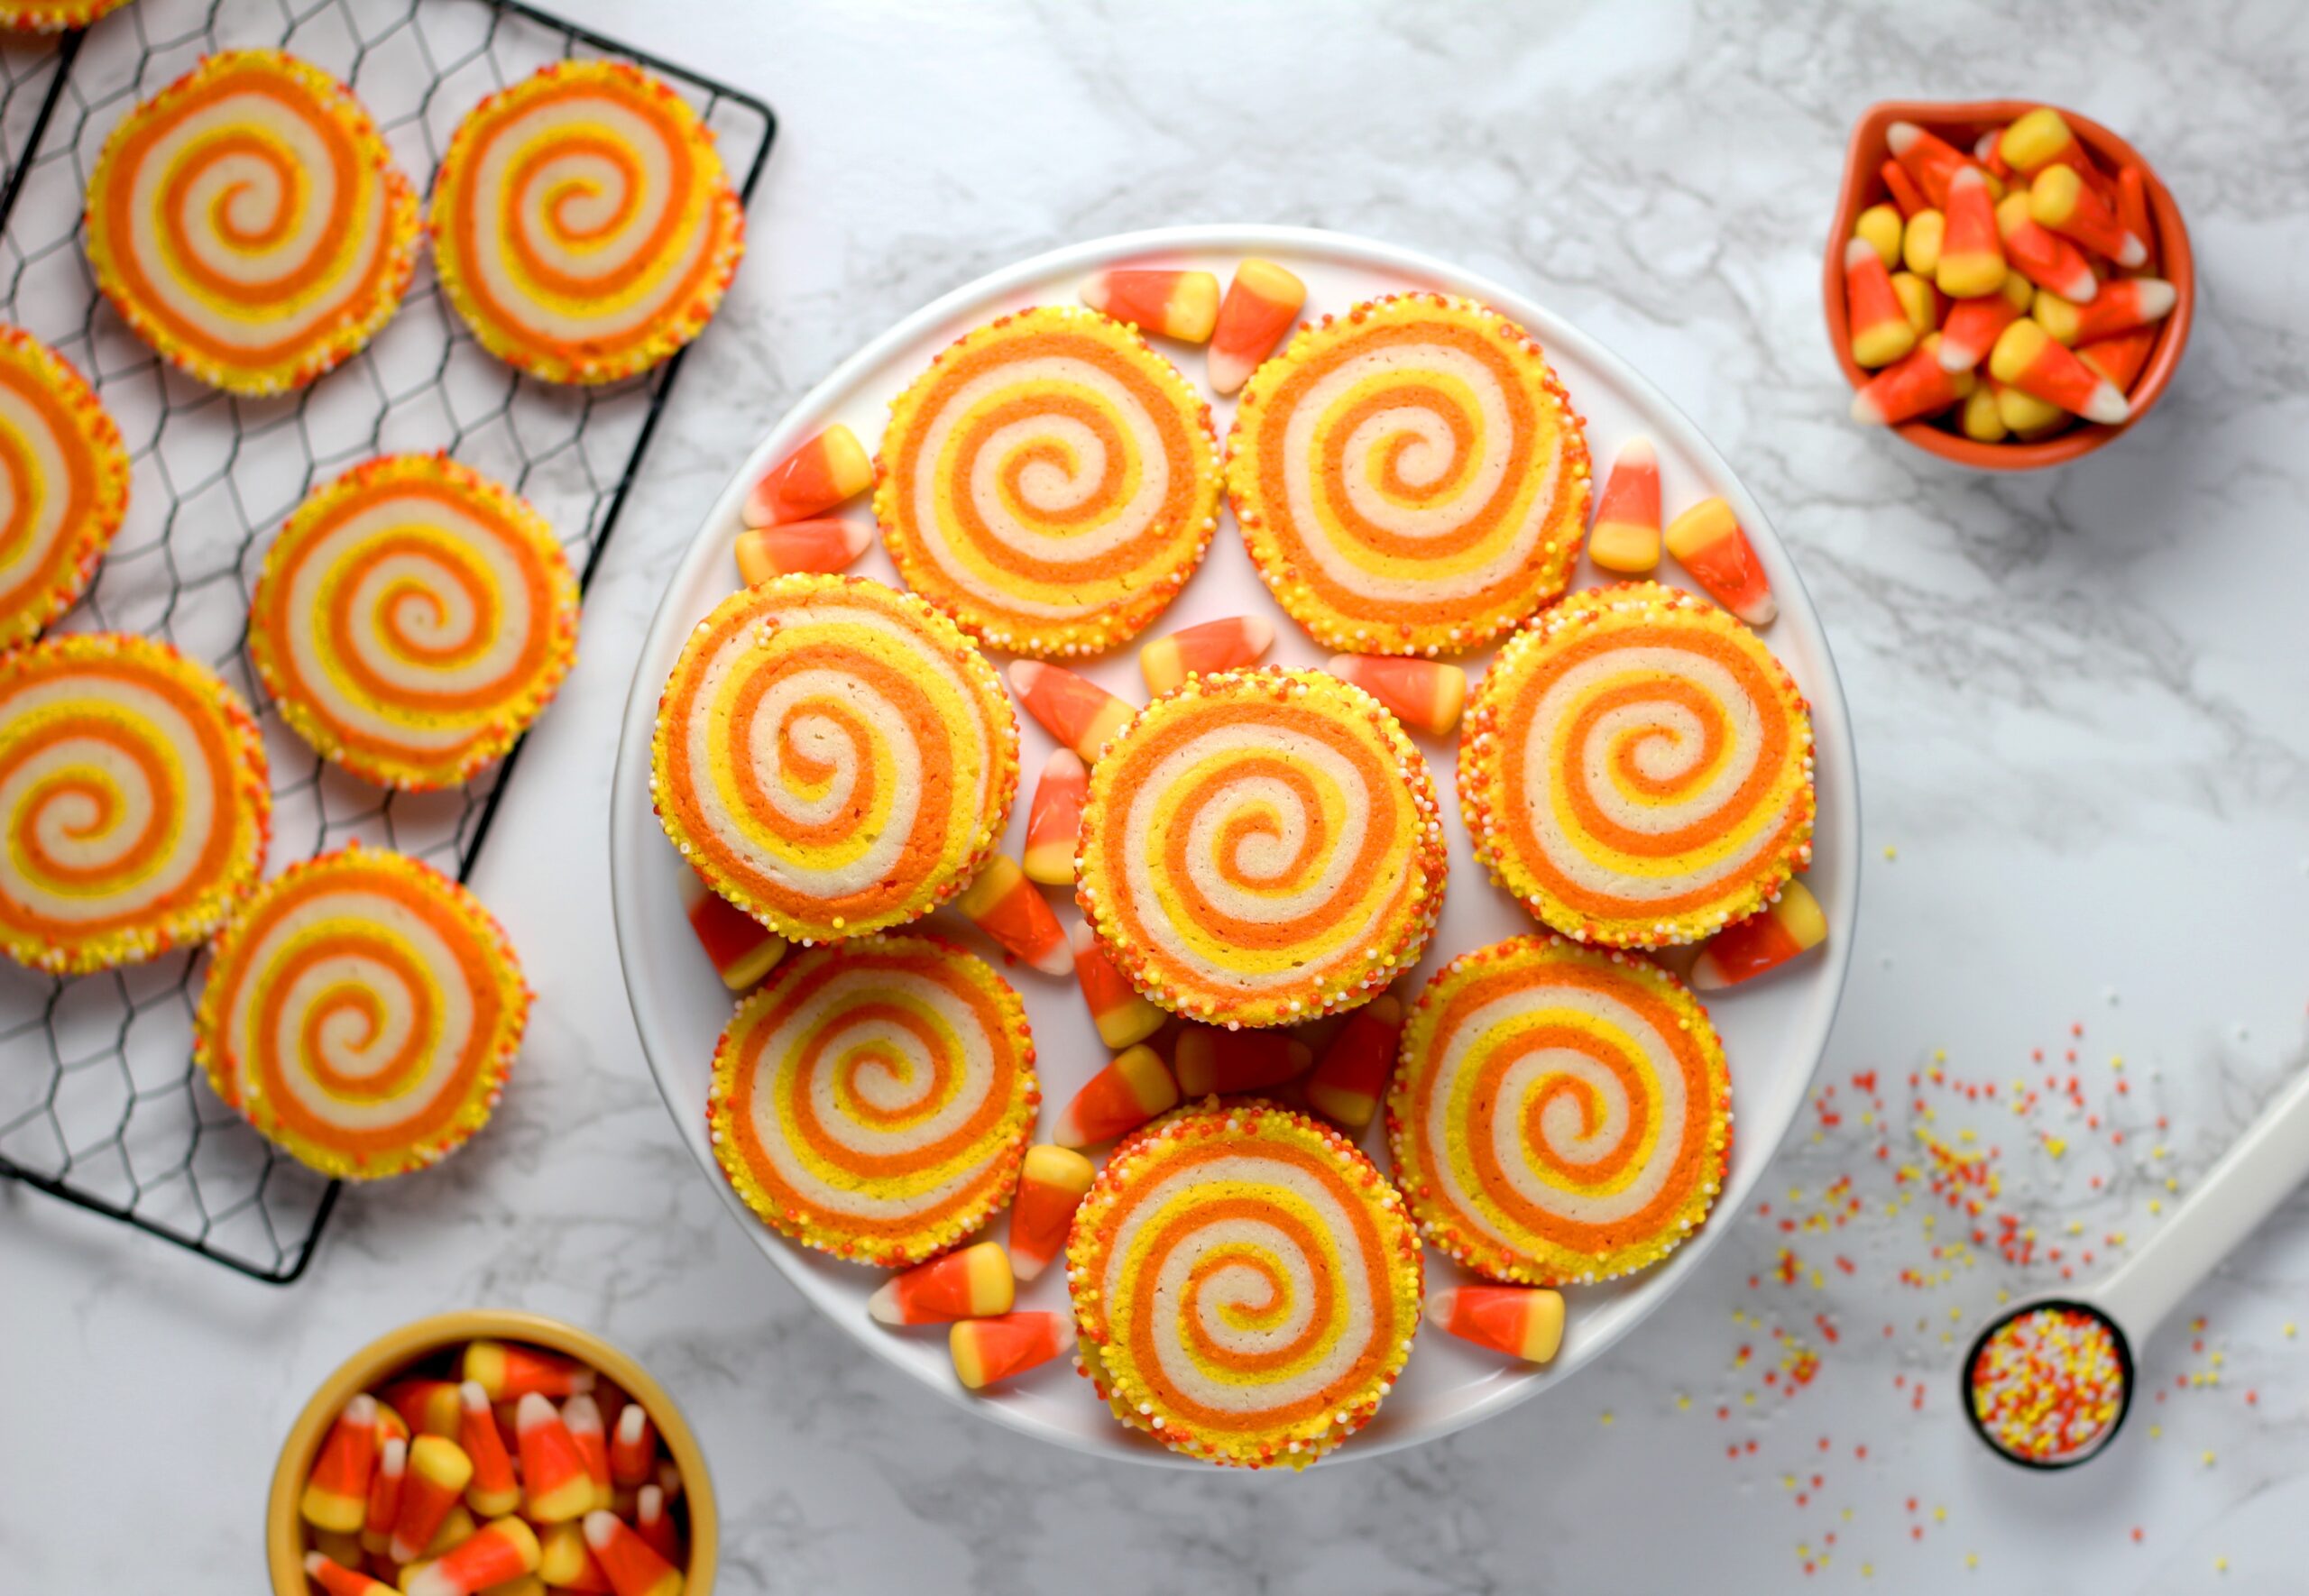 With spooky season approaching, invite guests over for a Halloween potluck theme. Pictured: Halloween dessert.